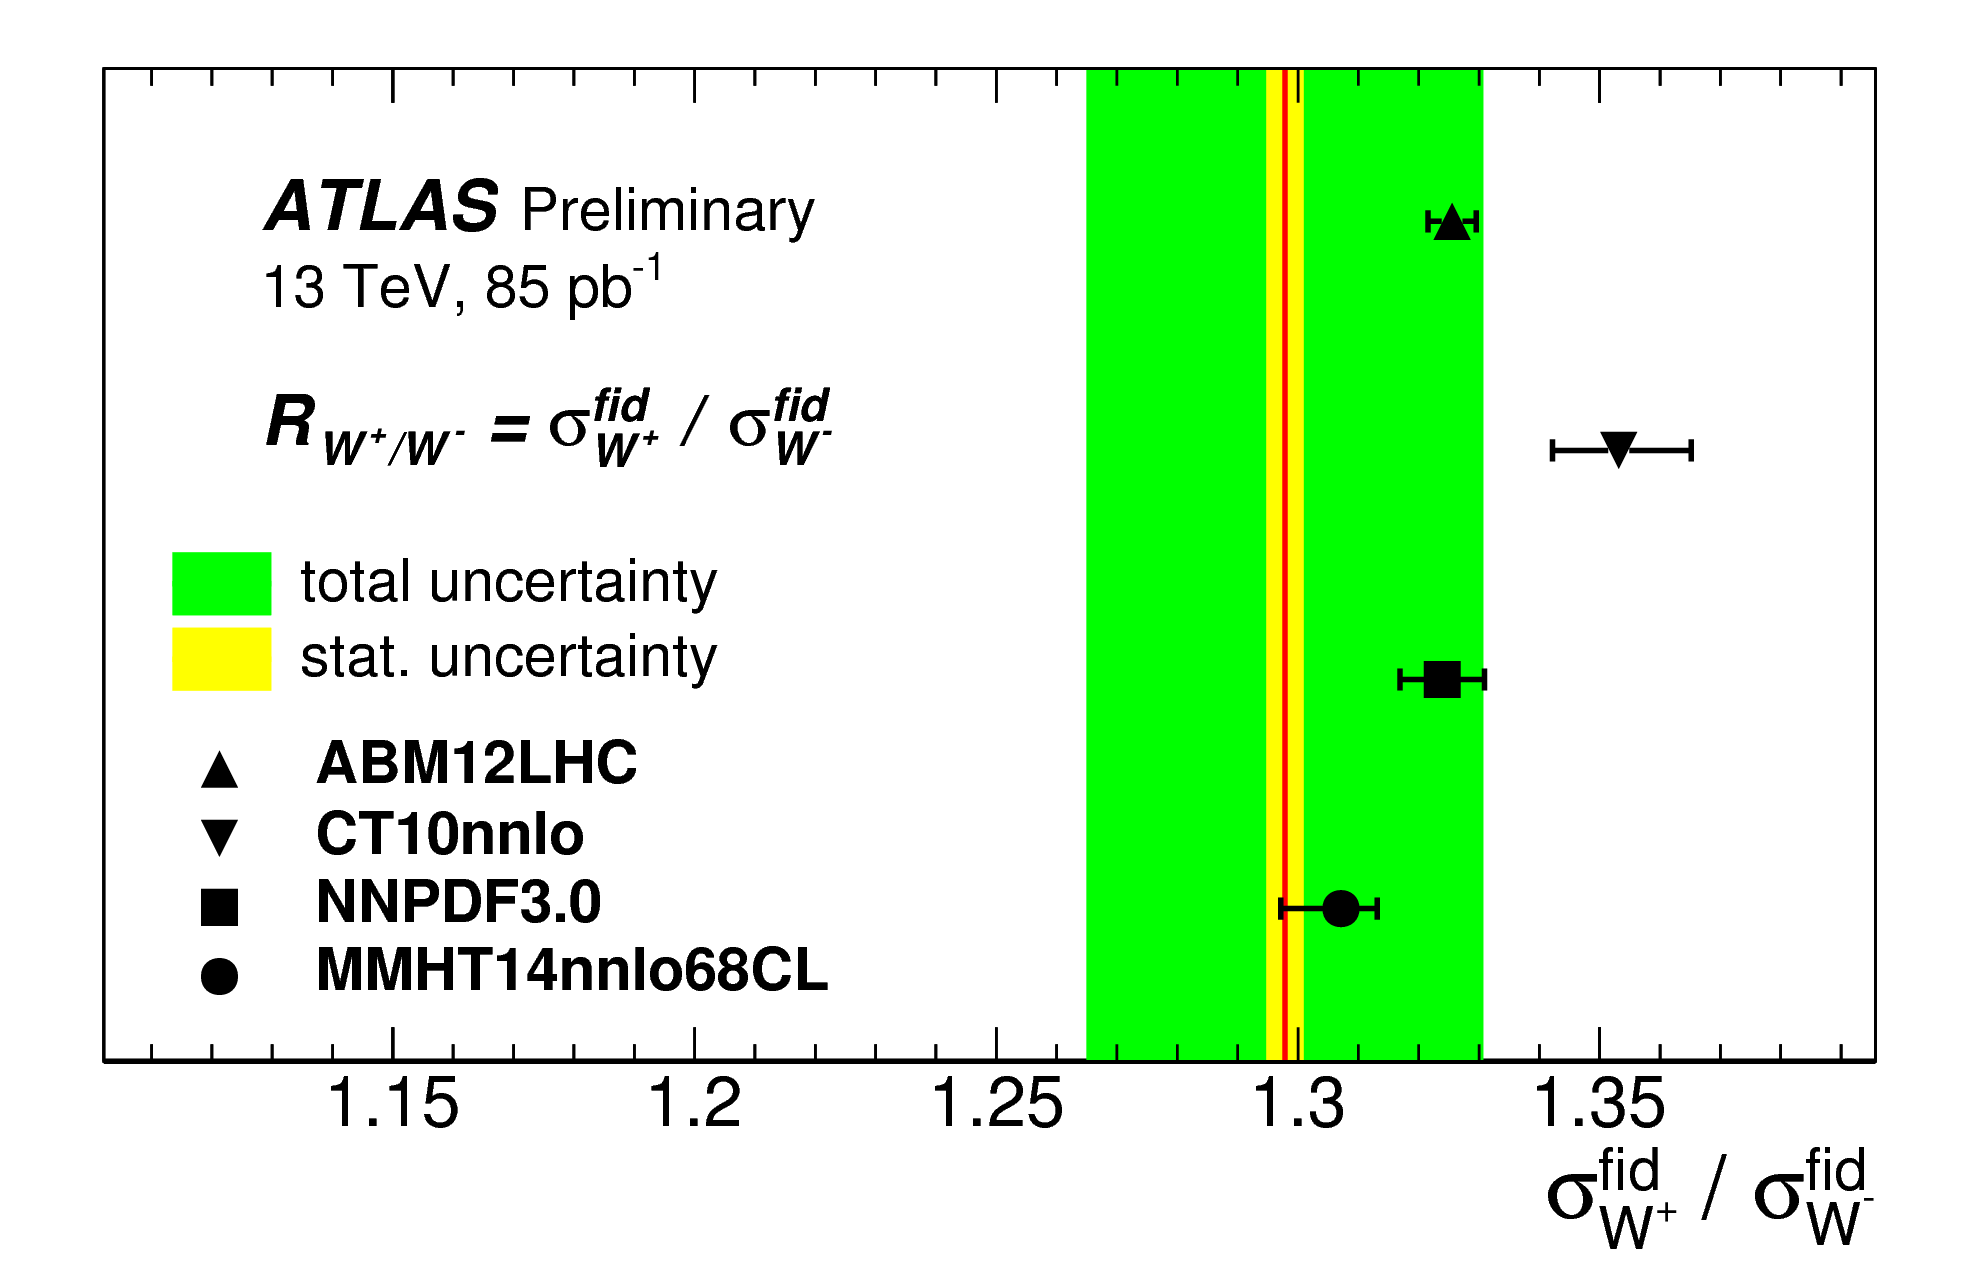 Ratio of W+ to W- boson production fiducial cross sections